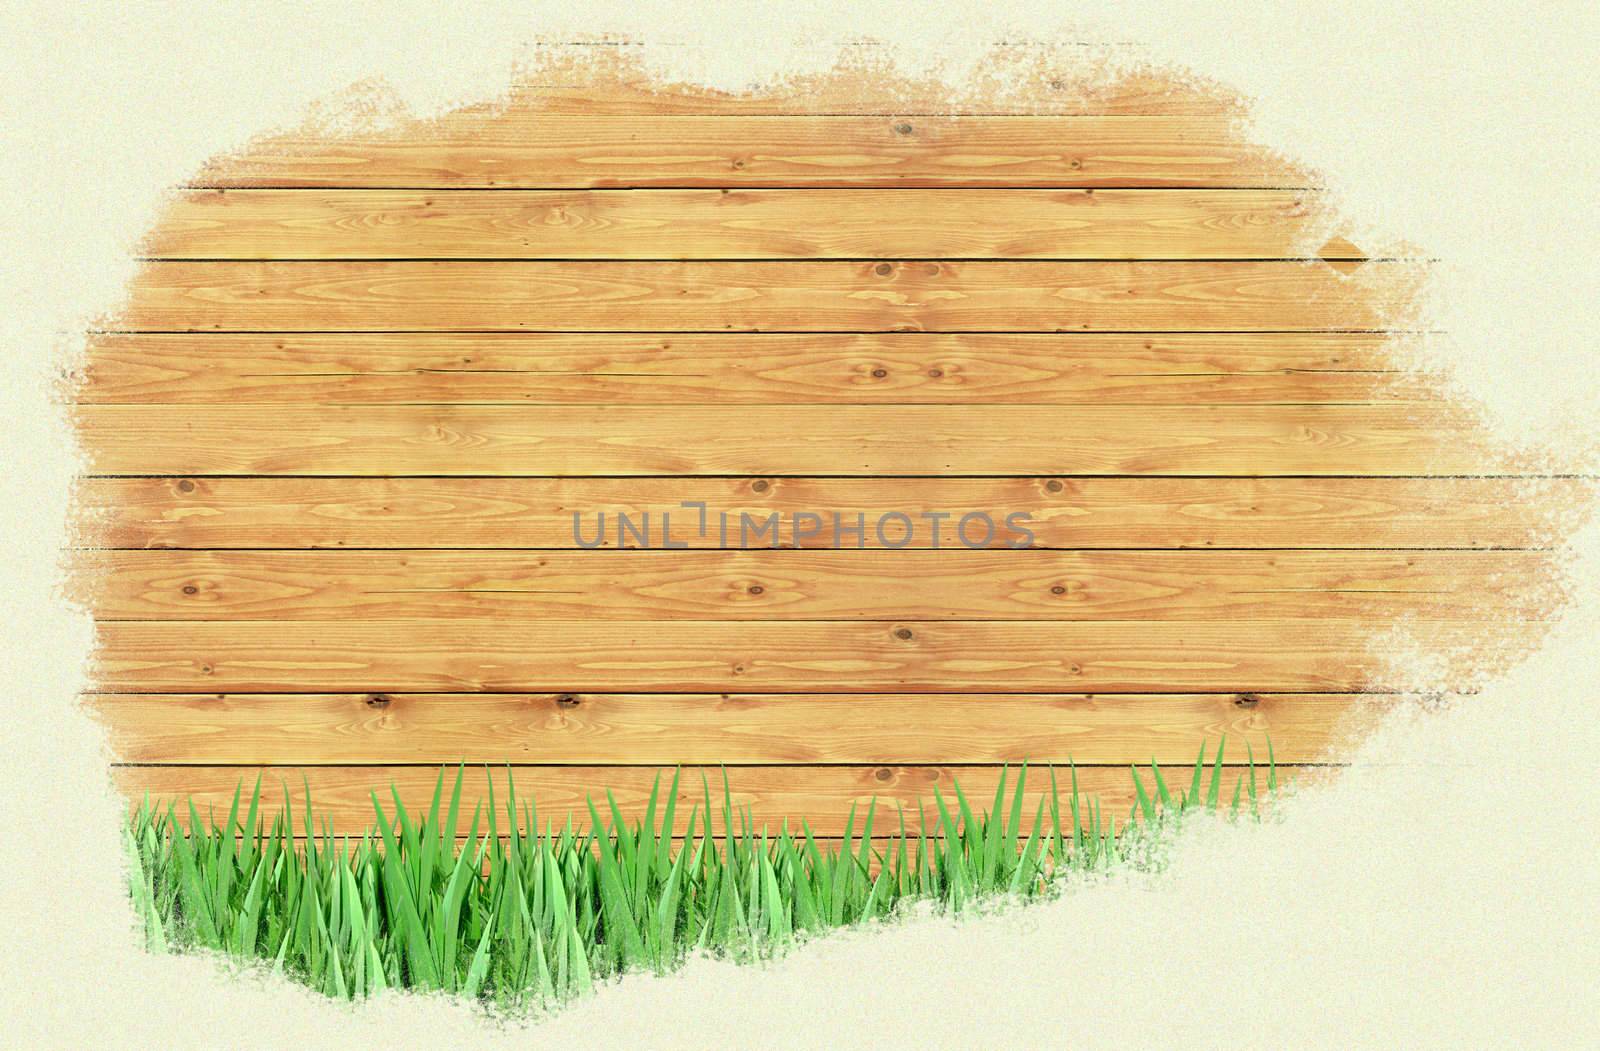 Wood and Grass for background and text  by rufous